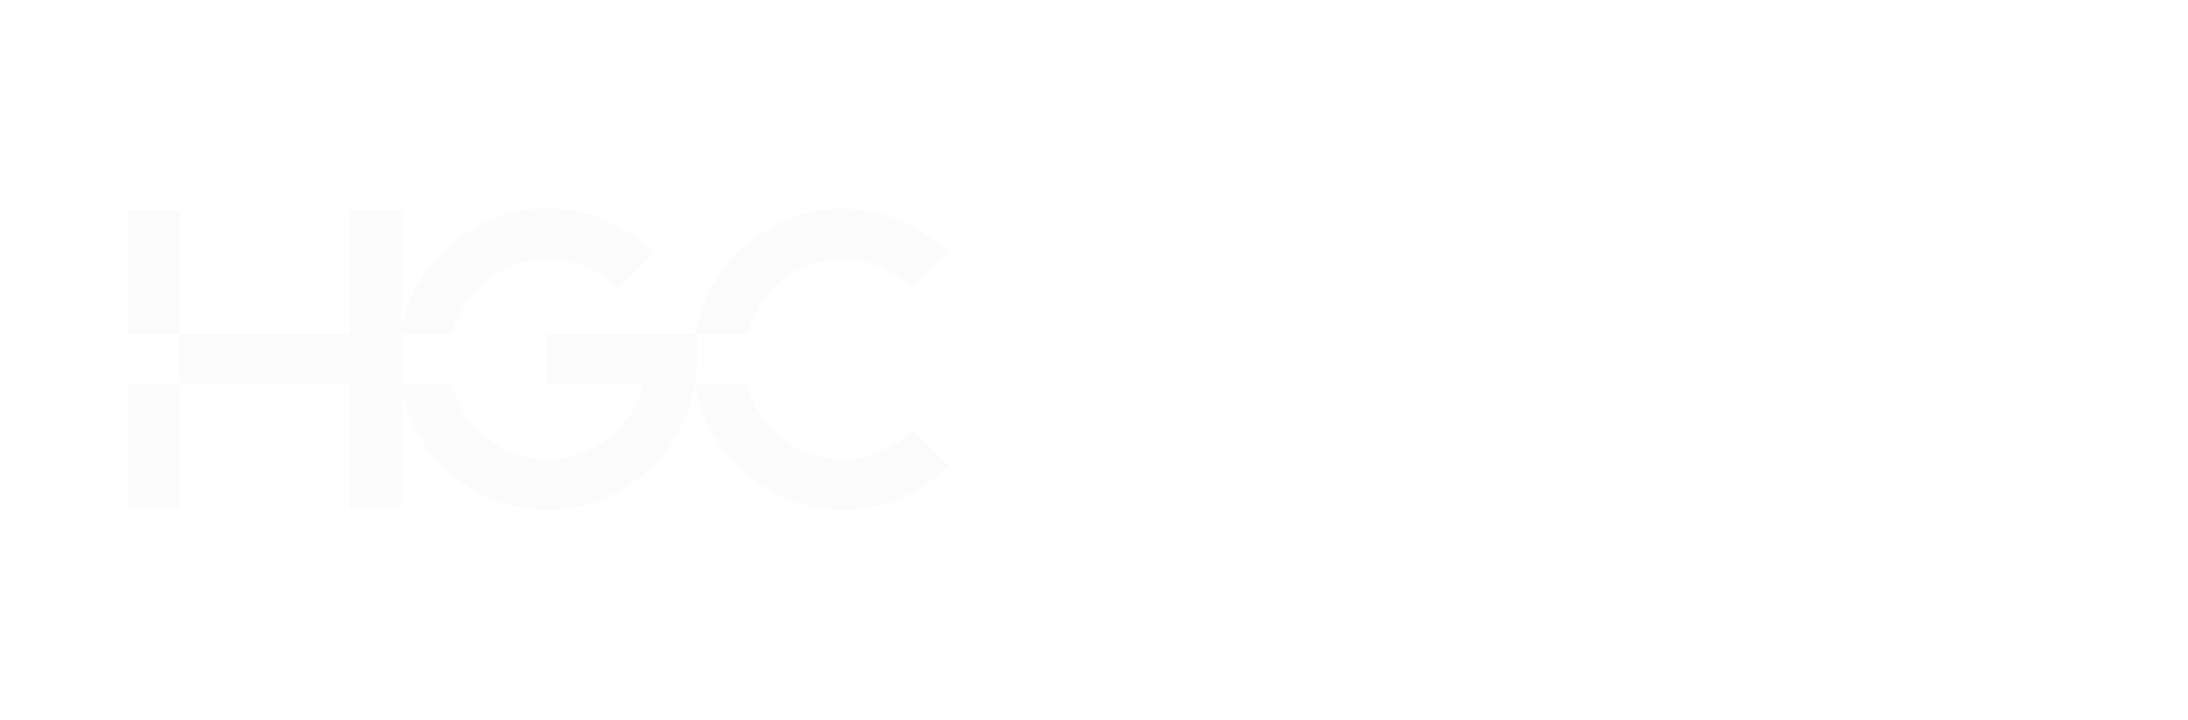 Logo of hgc global communications on a black background.